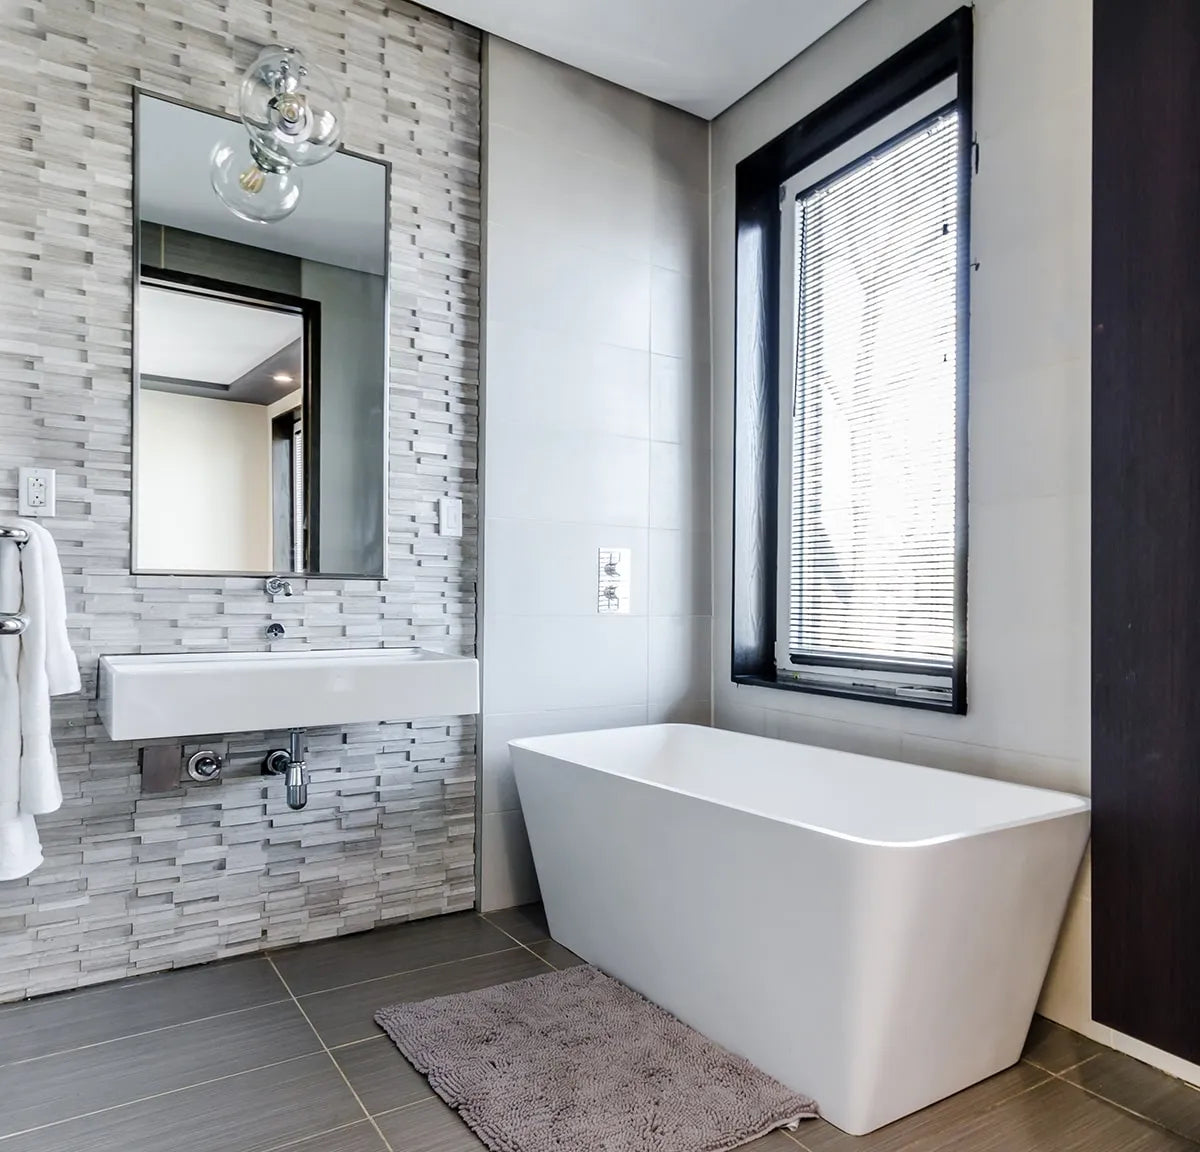 Explore Bathroom Design Ideas, Costs, Guides, and More